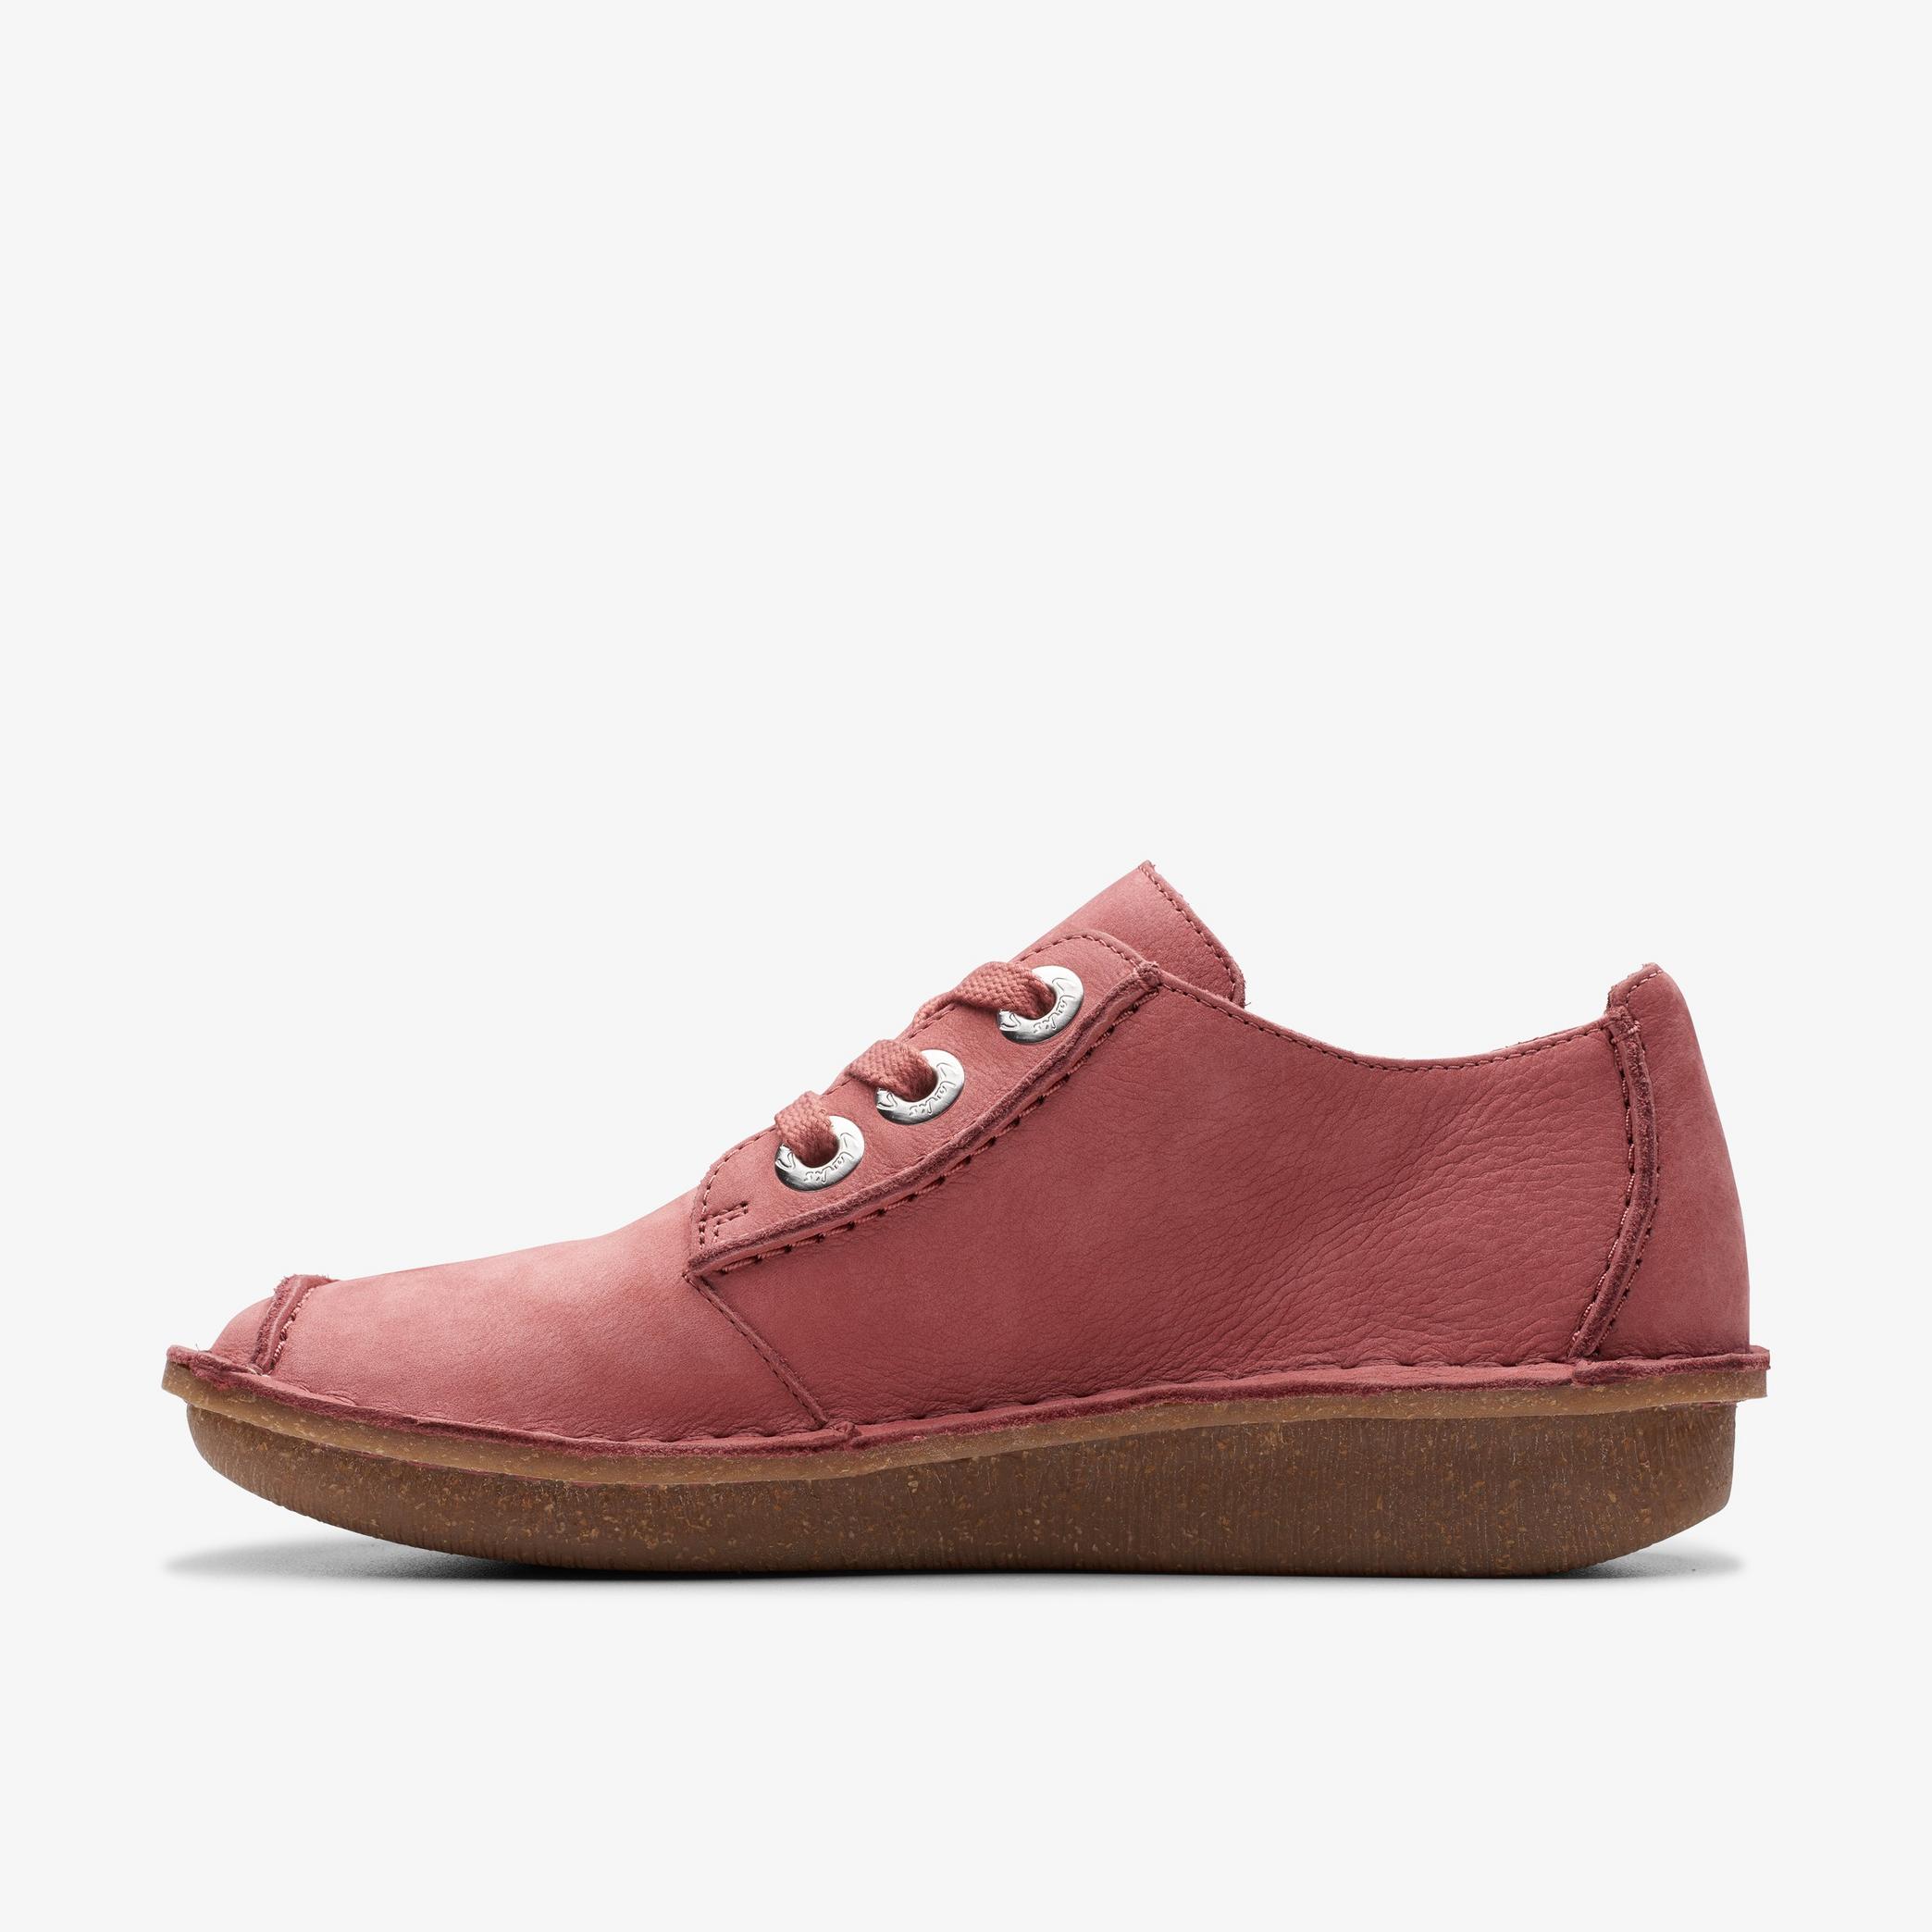 Funny Dream Dusty Rose Nubuck Derby Shoes, view 2 of 6